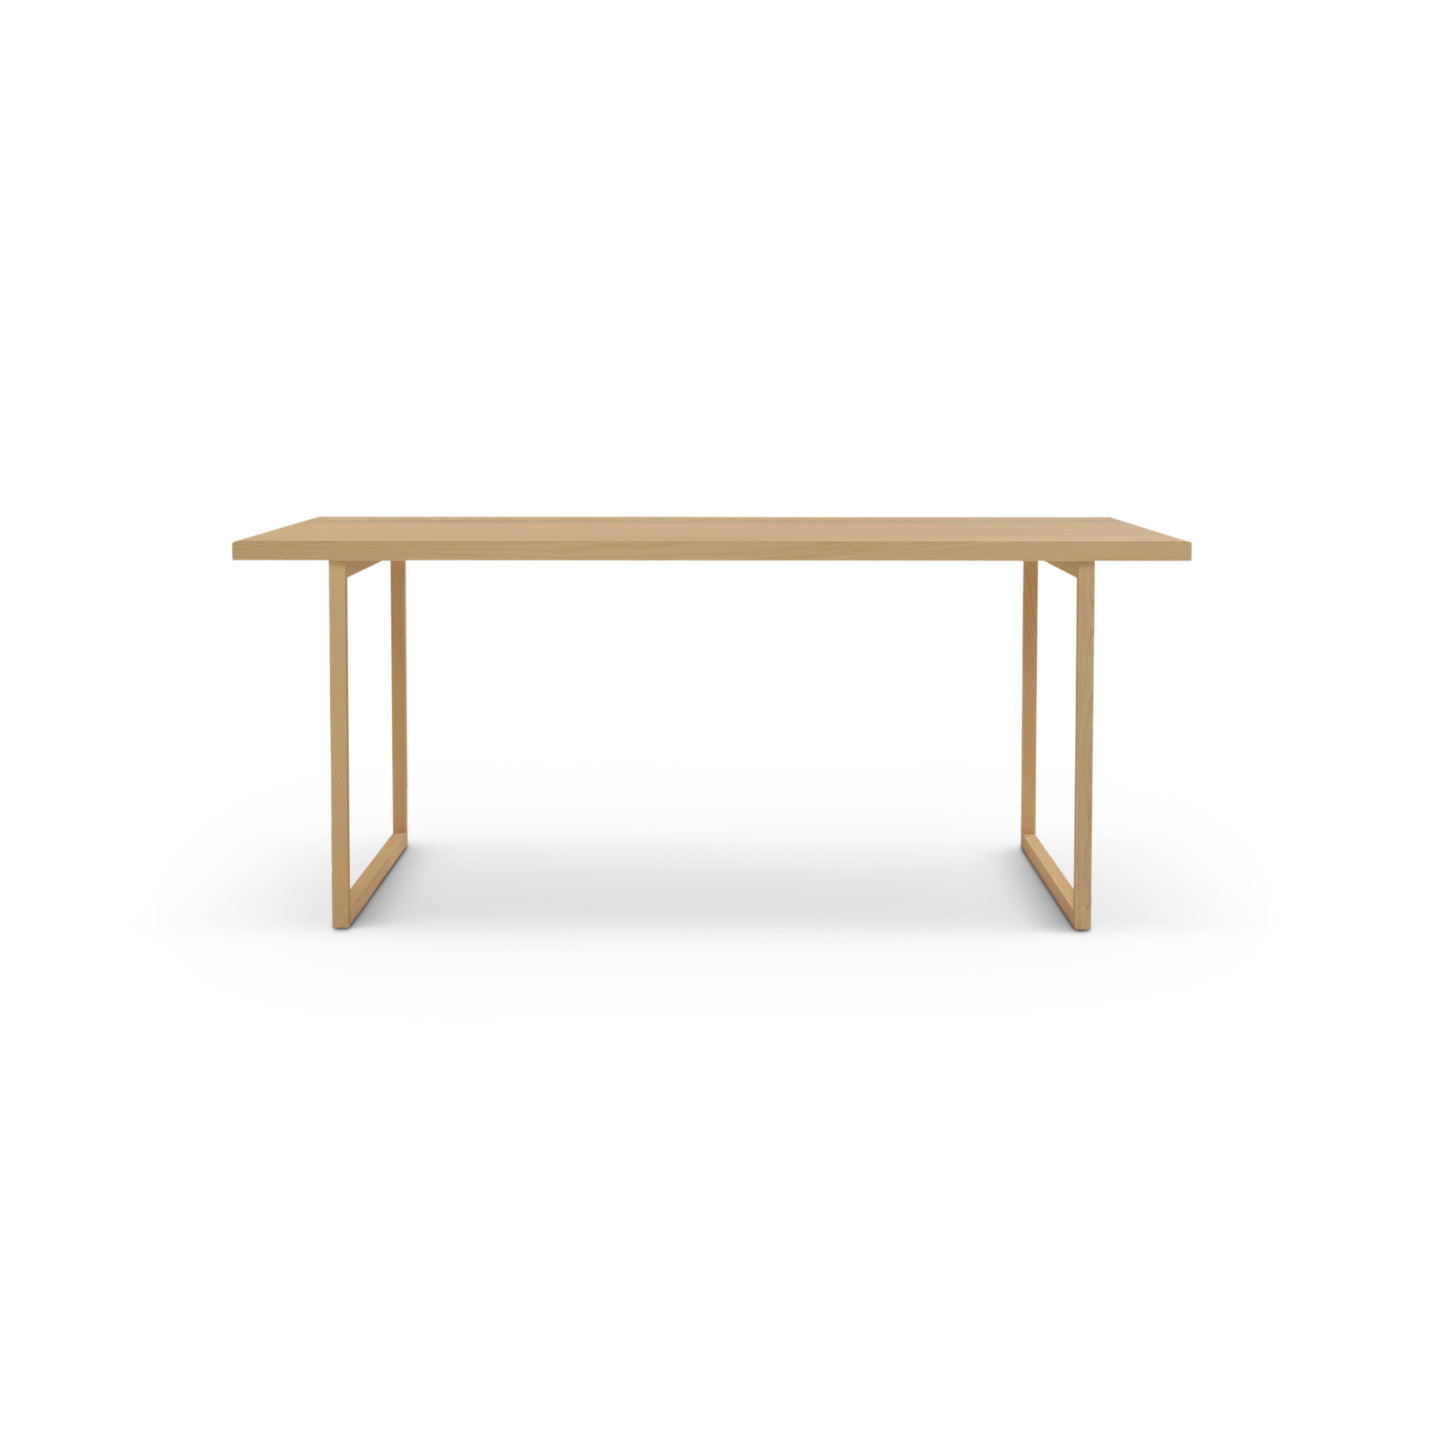 Square legs ash table with a solid wood top